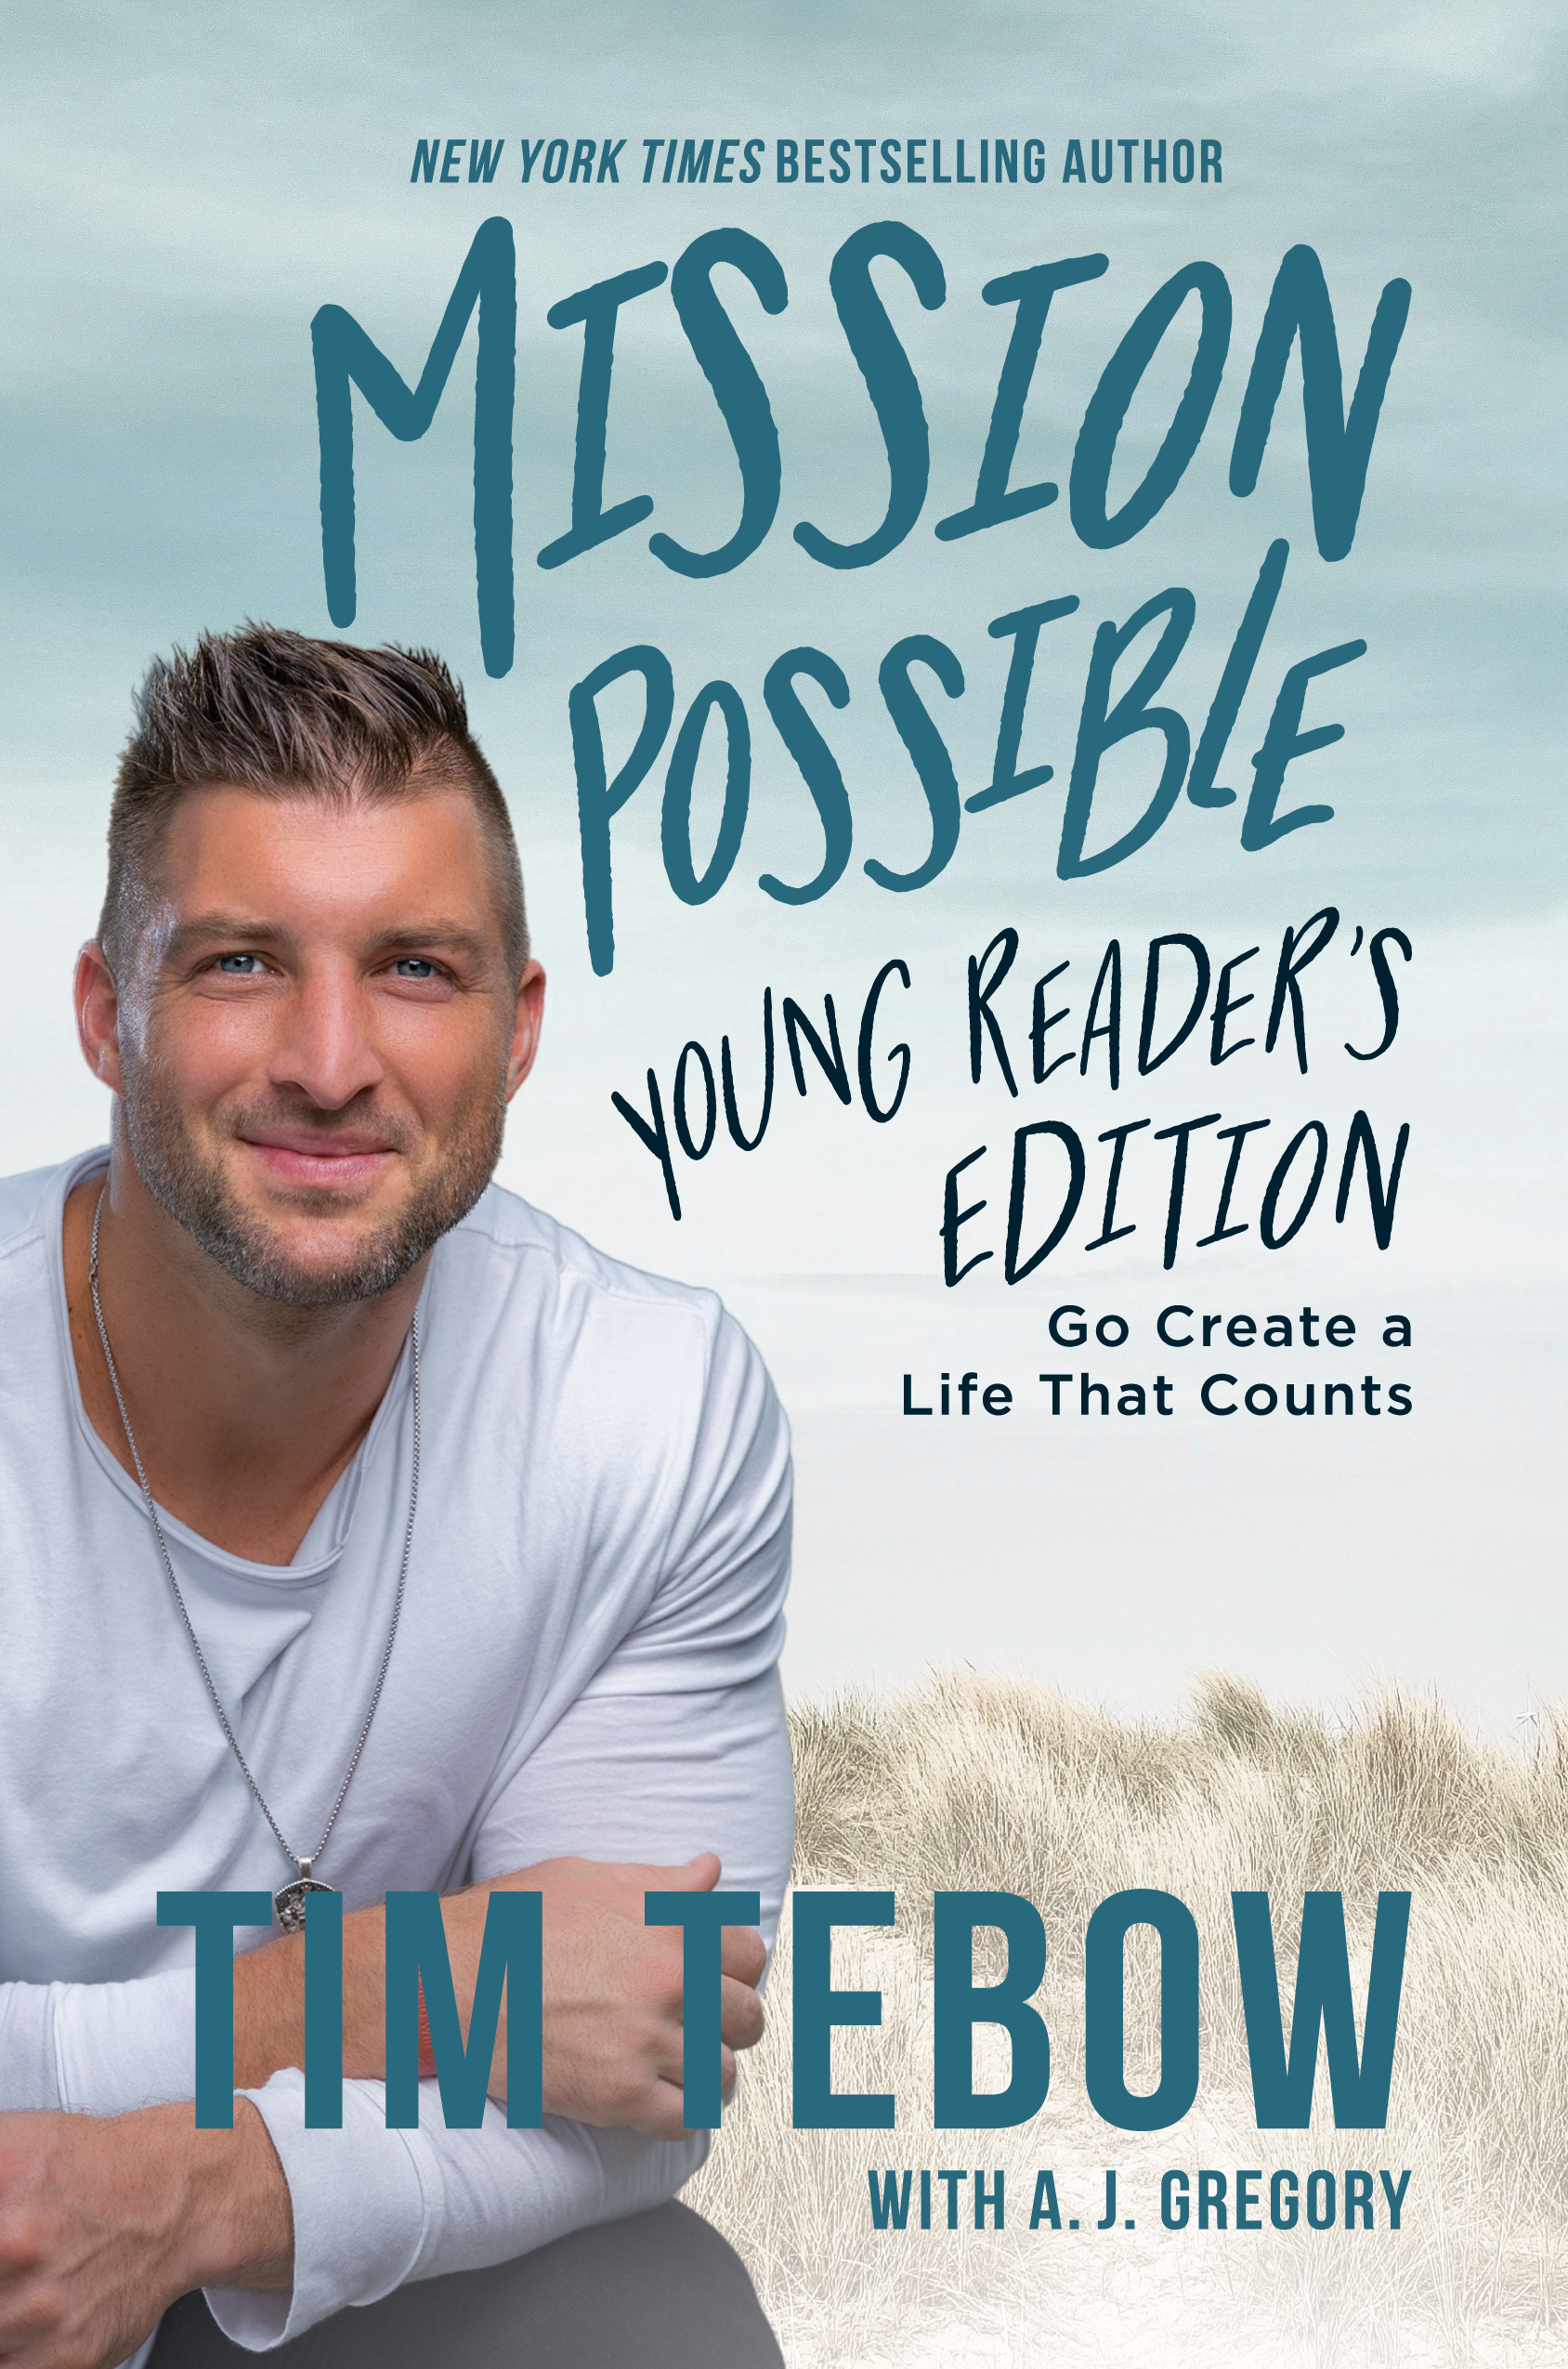 Inspiration From Tim Tebow, + a giveaway of his new book for young readers!